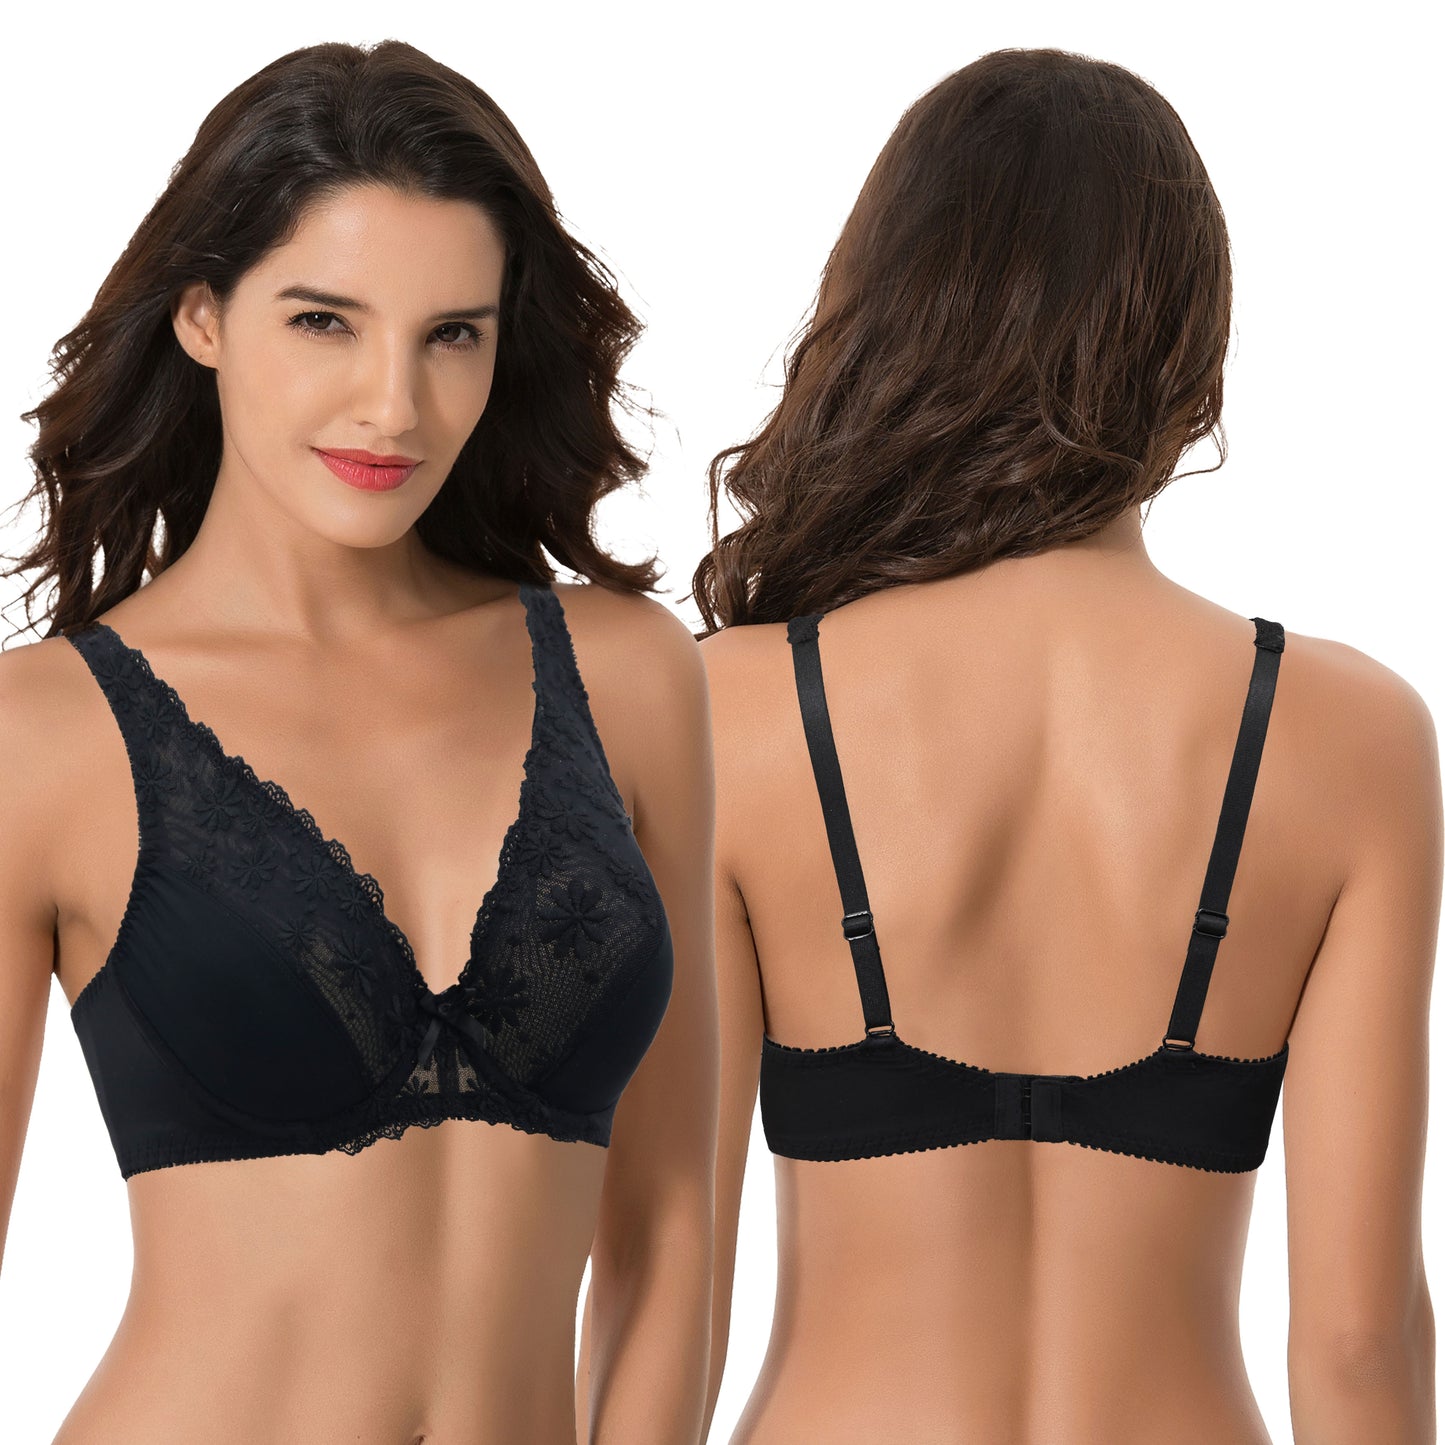 Women Plus Size Minimizer Underwire Unlined Bra with Embroidery Mesh-2pack-Black,Cream